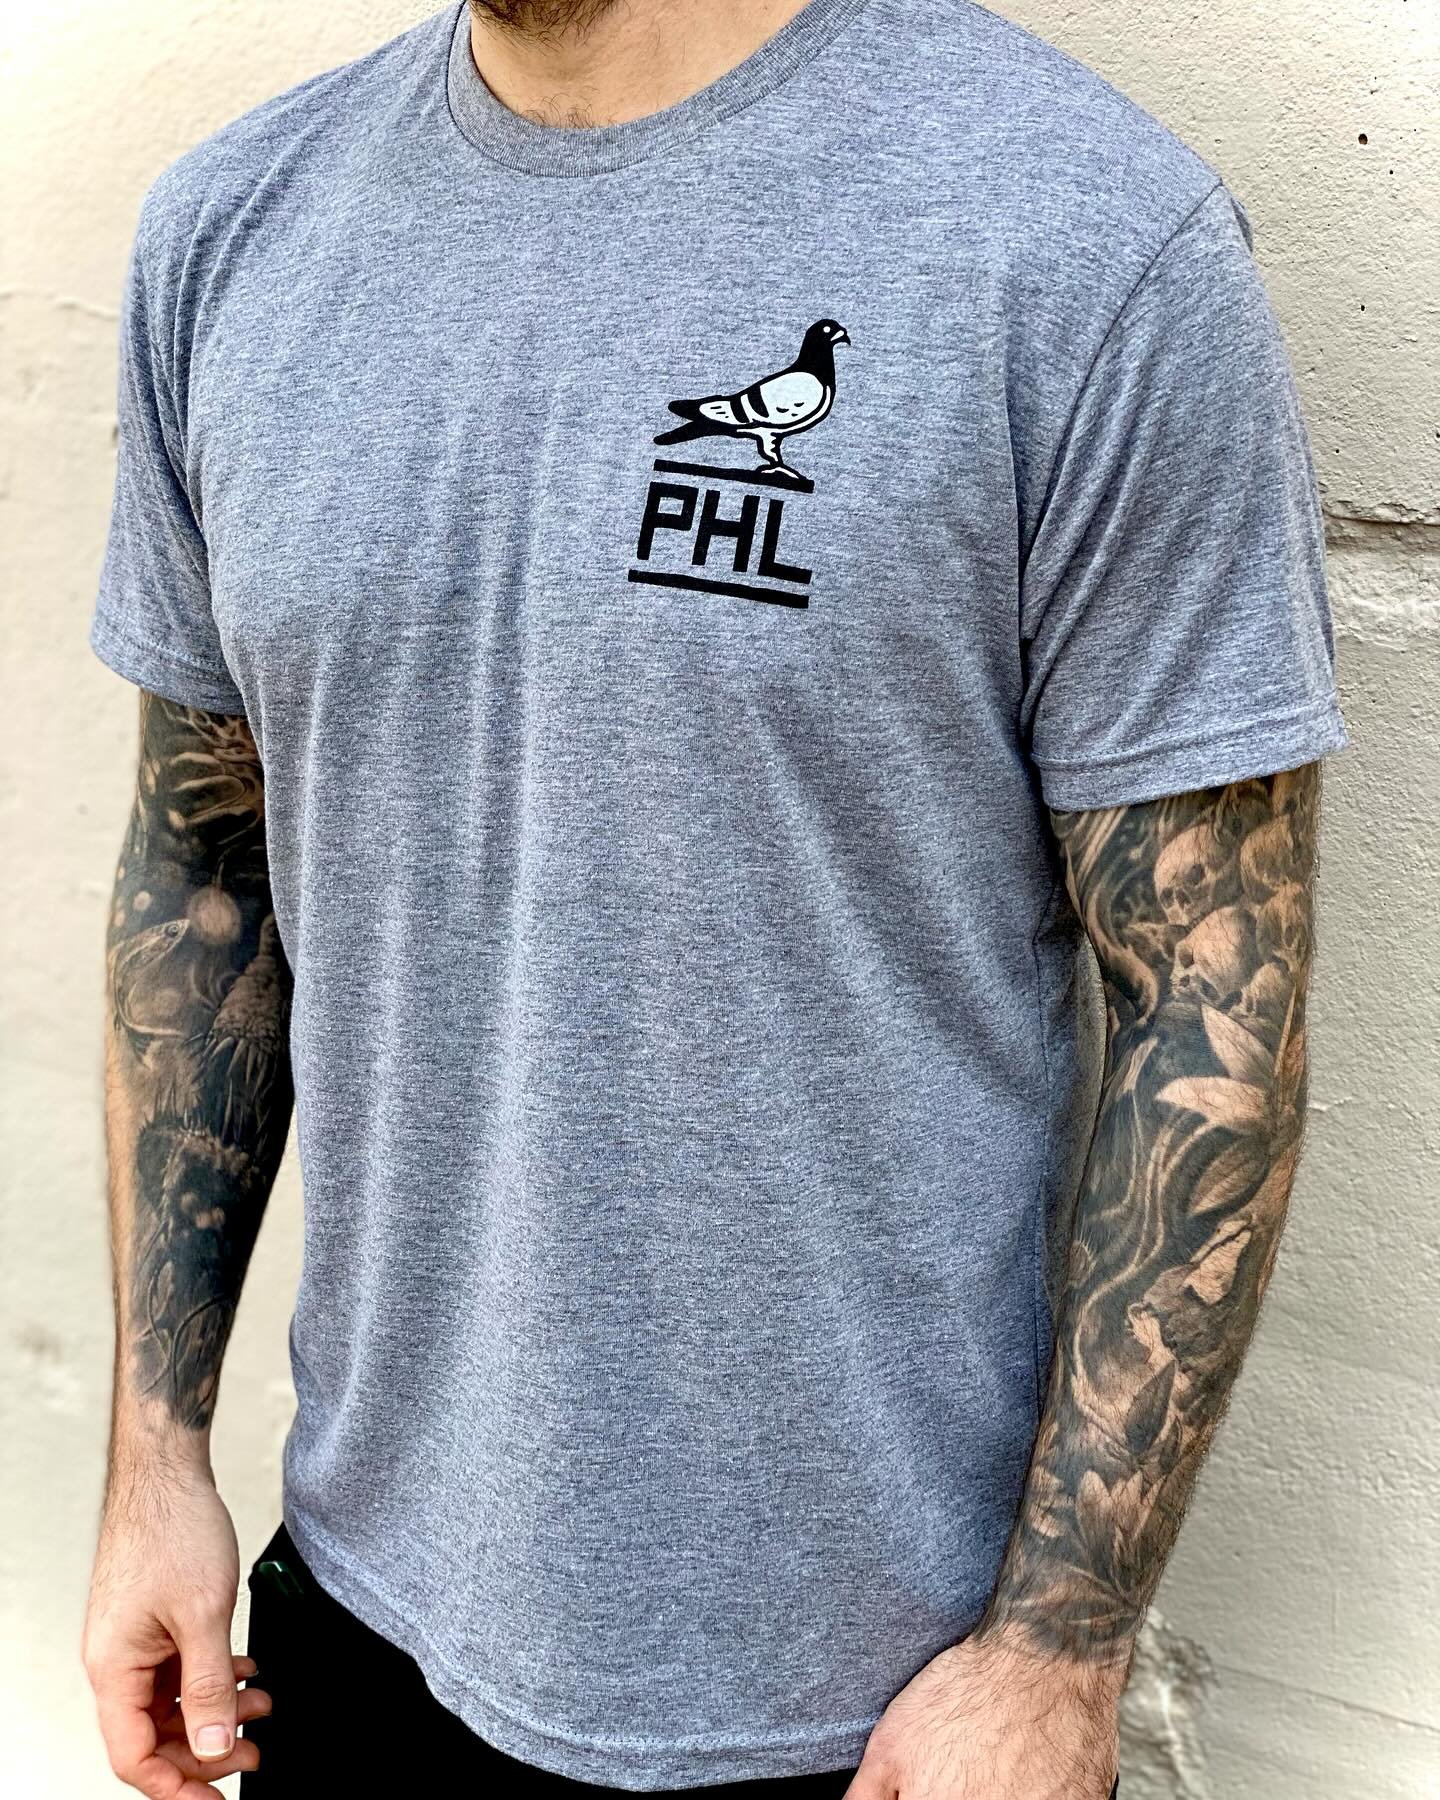 NEW &ldquo;City of Firsts&rdquo; tri-blend tees and mineral wash hoodies coming to @clovermarket Sunday 4/14, 10-4 in Chestnut Hill, Philadelphia!
.
.
.
#paulcarpenterart #cloversneakpeek #clovermarket #streetwear #philly #philadelphia #phl